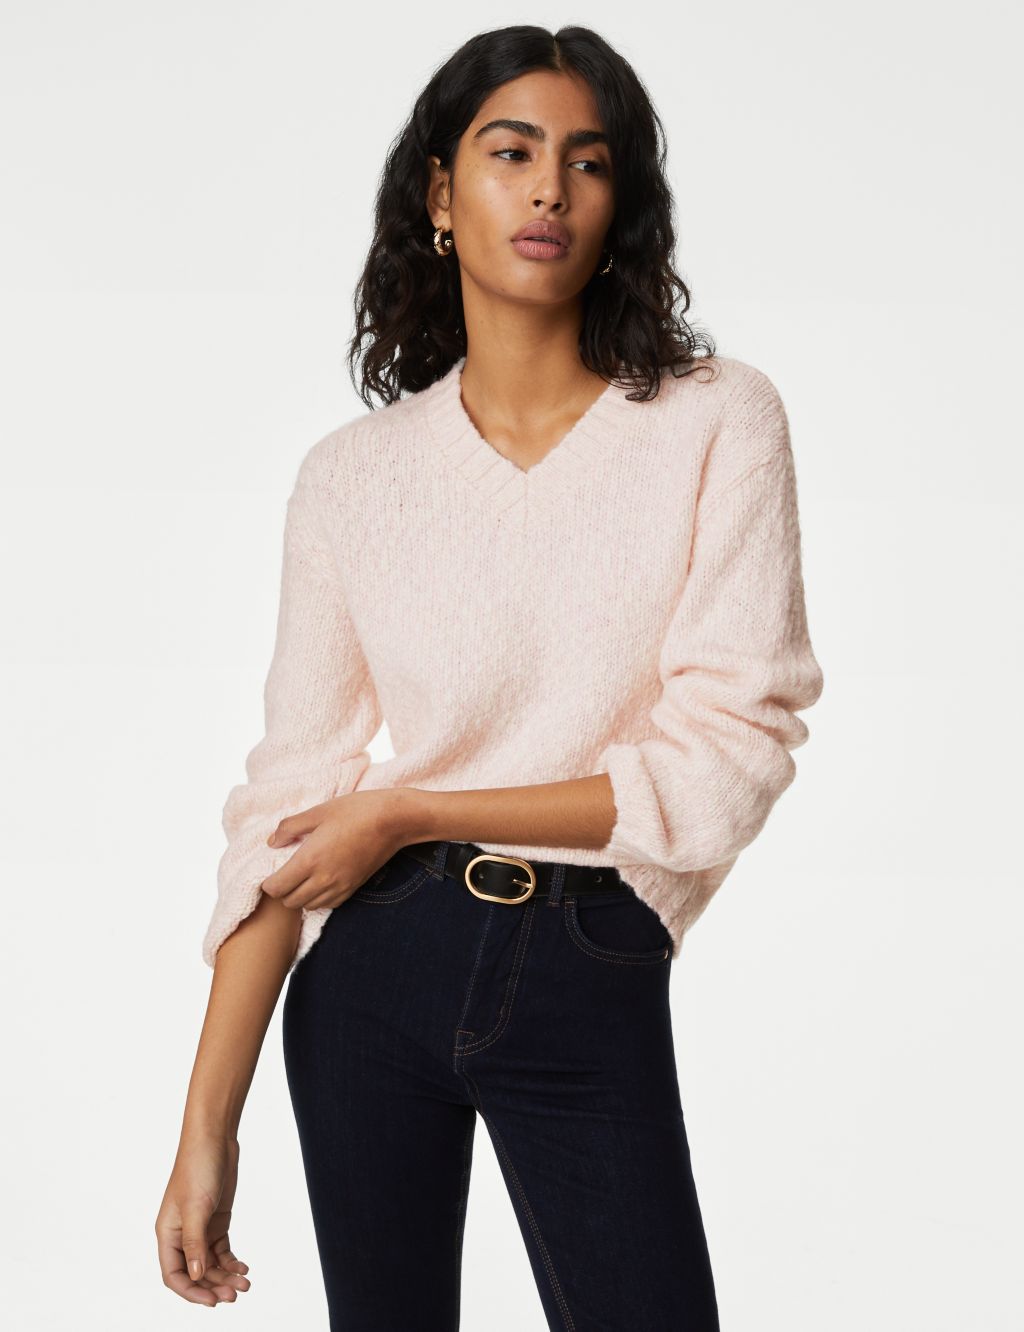 Textured V-Neck Jumper with Wool image 1